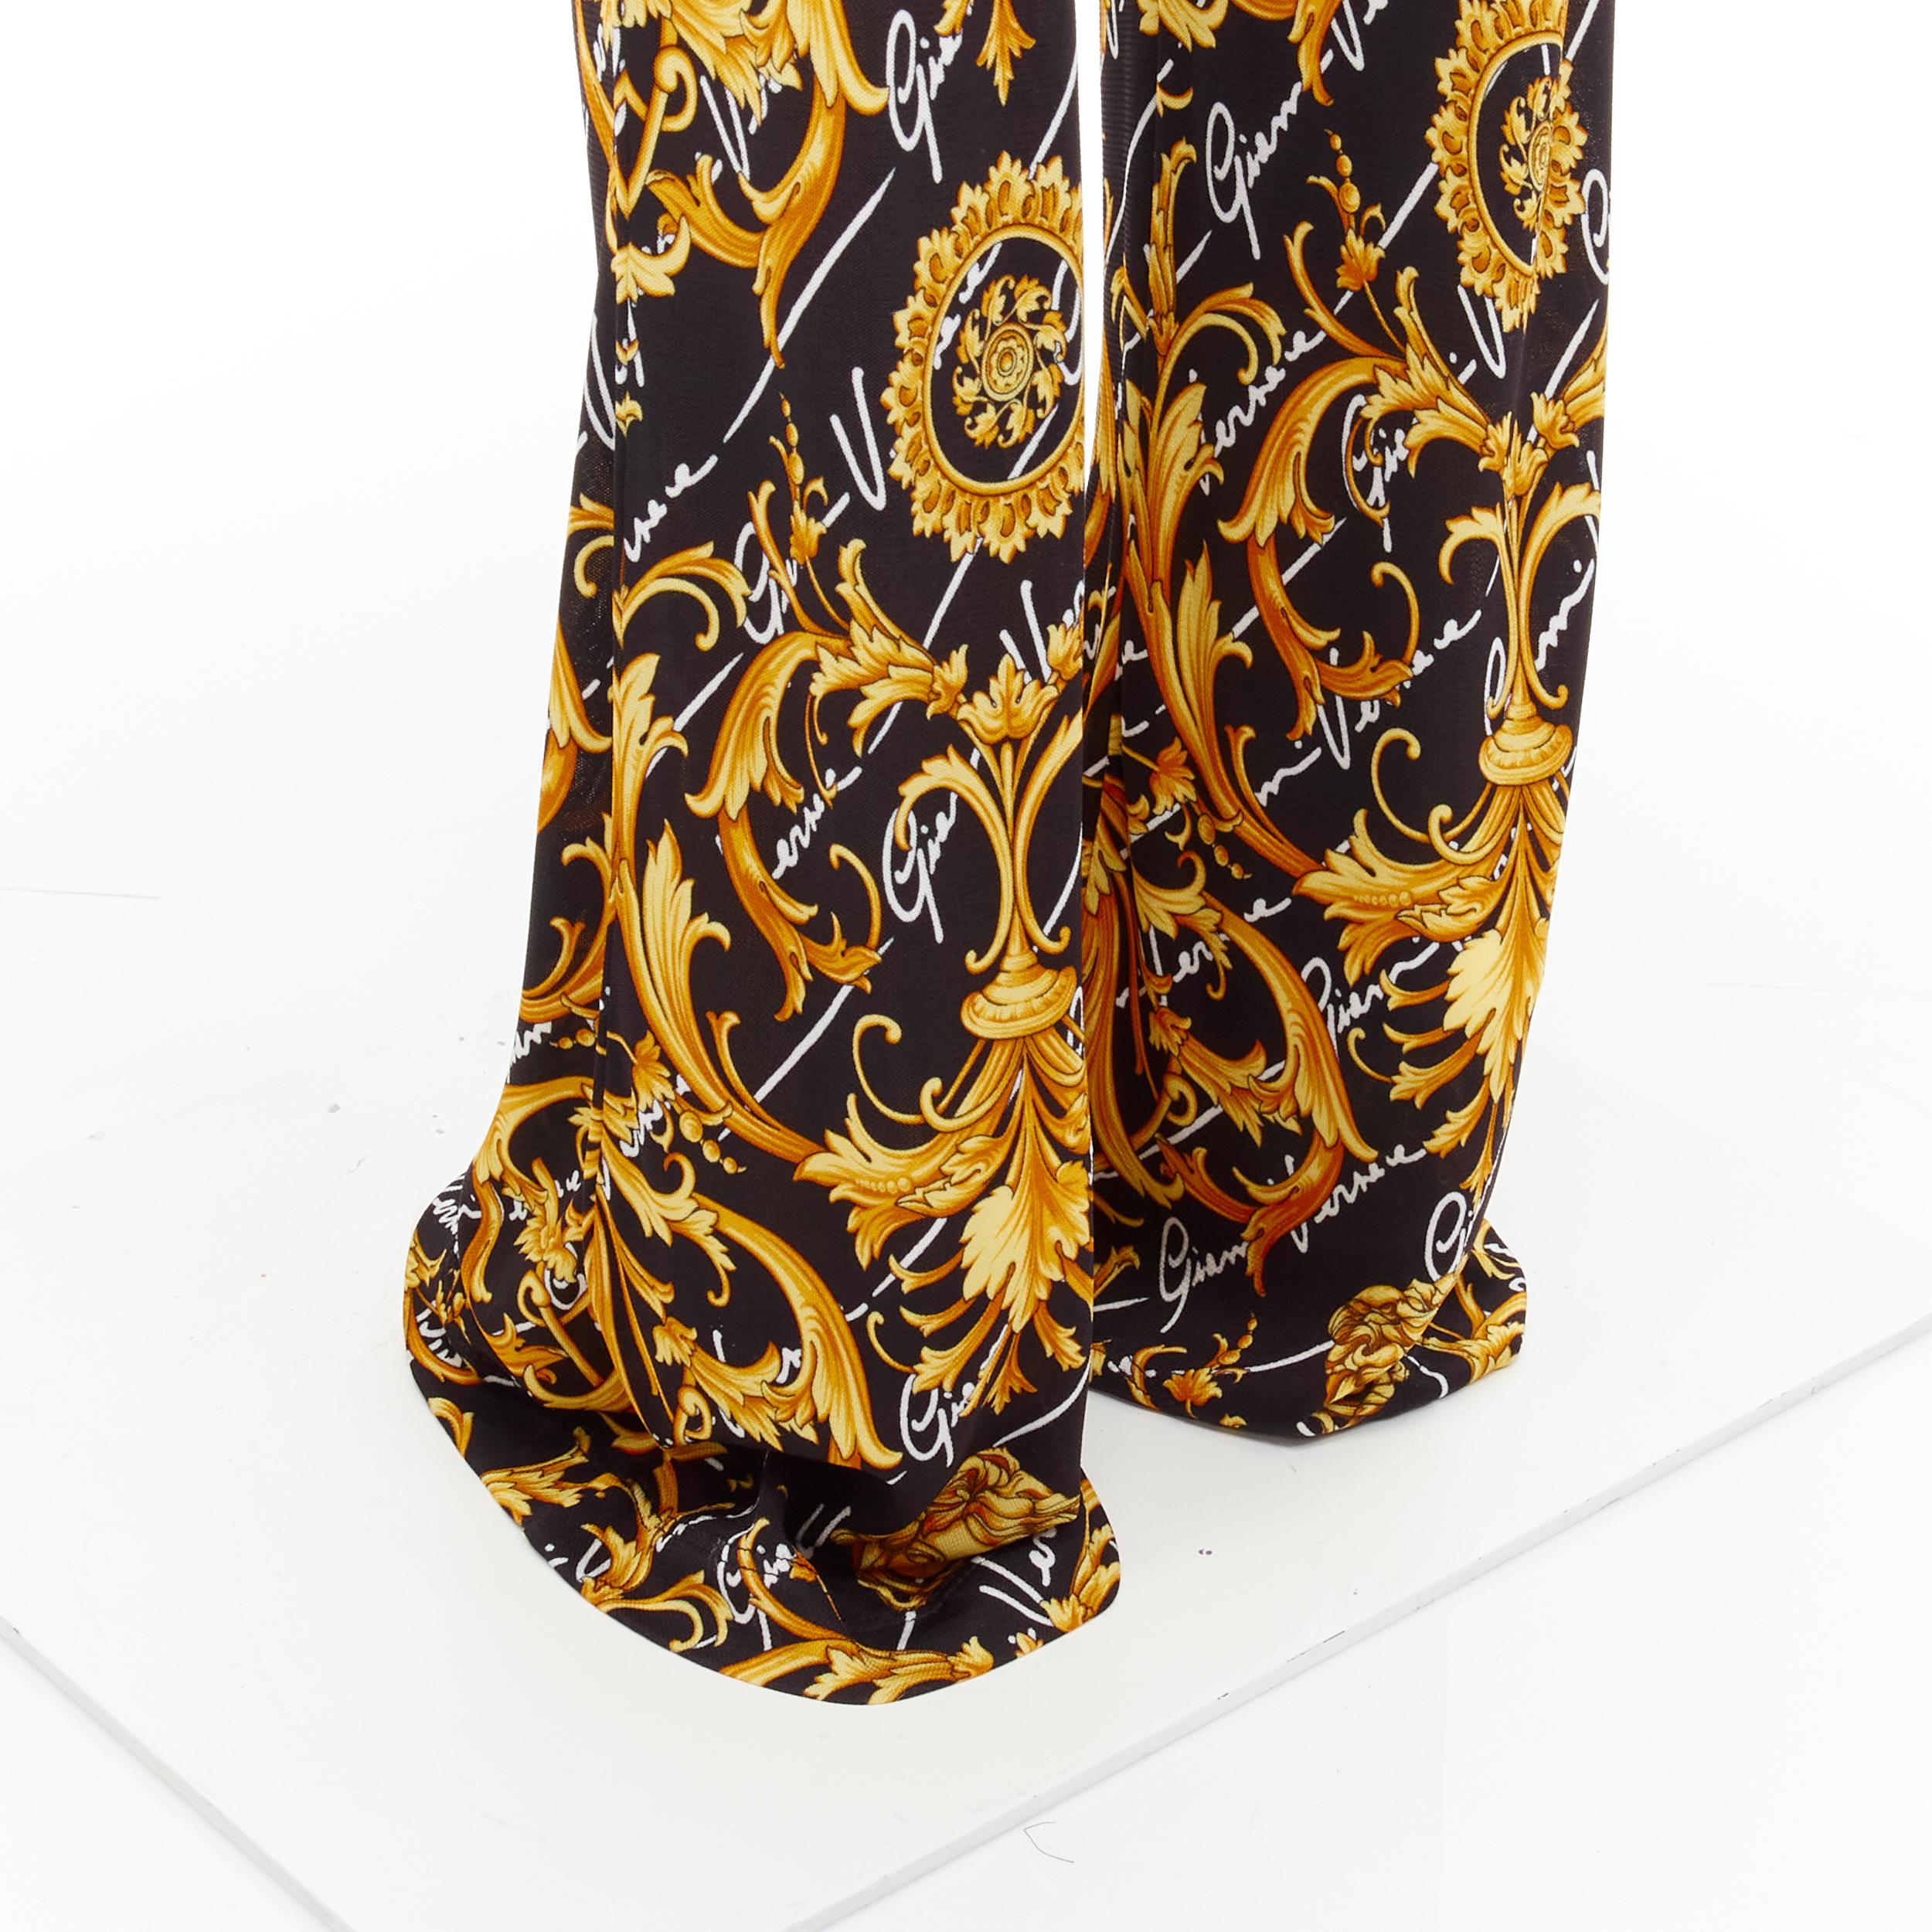 new VERSACE 2020 Runway Gianni Signature Medusa Barocco gold flare pants IT42 M 
Reference: TGAS/C01161 
Brand: Versace 
Designer: Donatella Versace 
Collection: Gianni Signature Runway 
Material: Viscose 
Color: Gold 
Pattern: Logo 
Extra Detail: